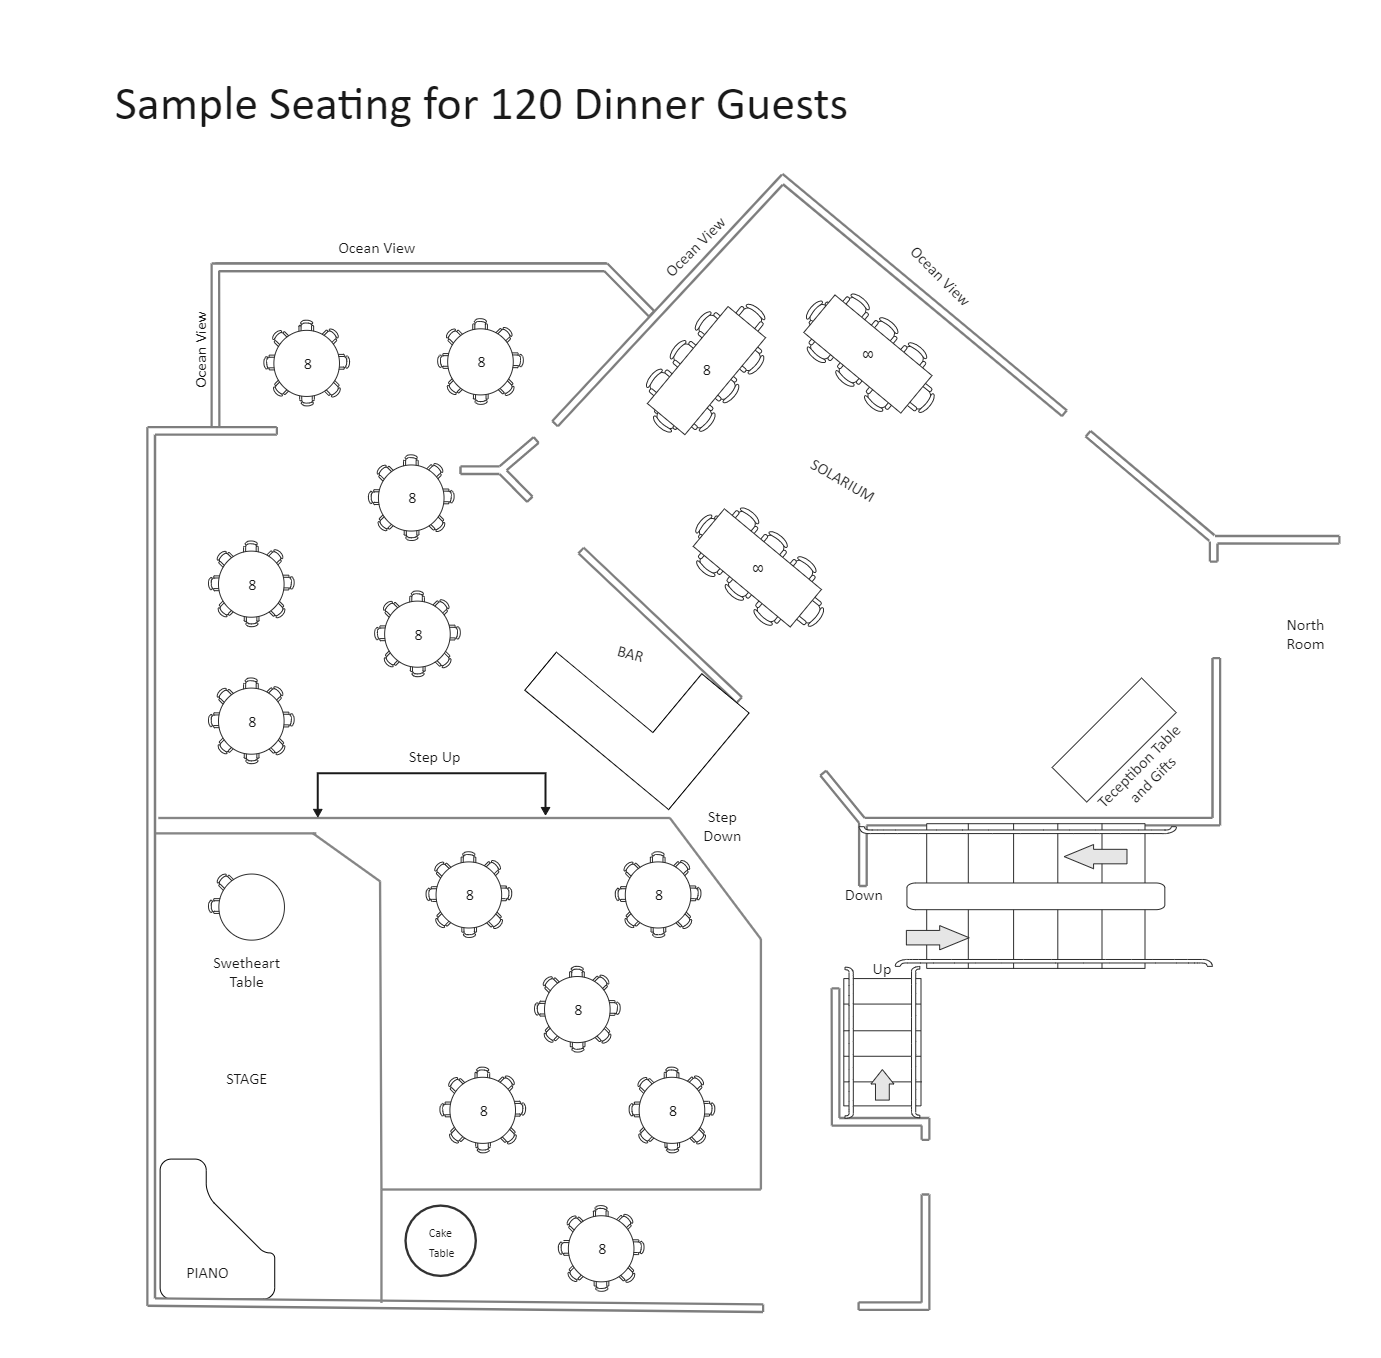 Dinner Table Seating Chart | EdrawMax Template